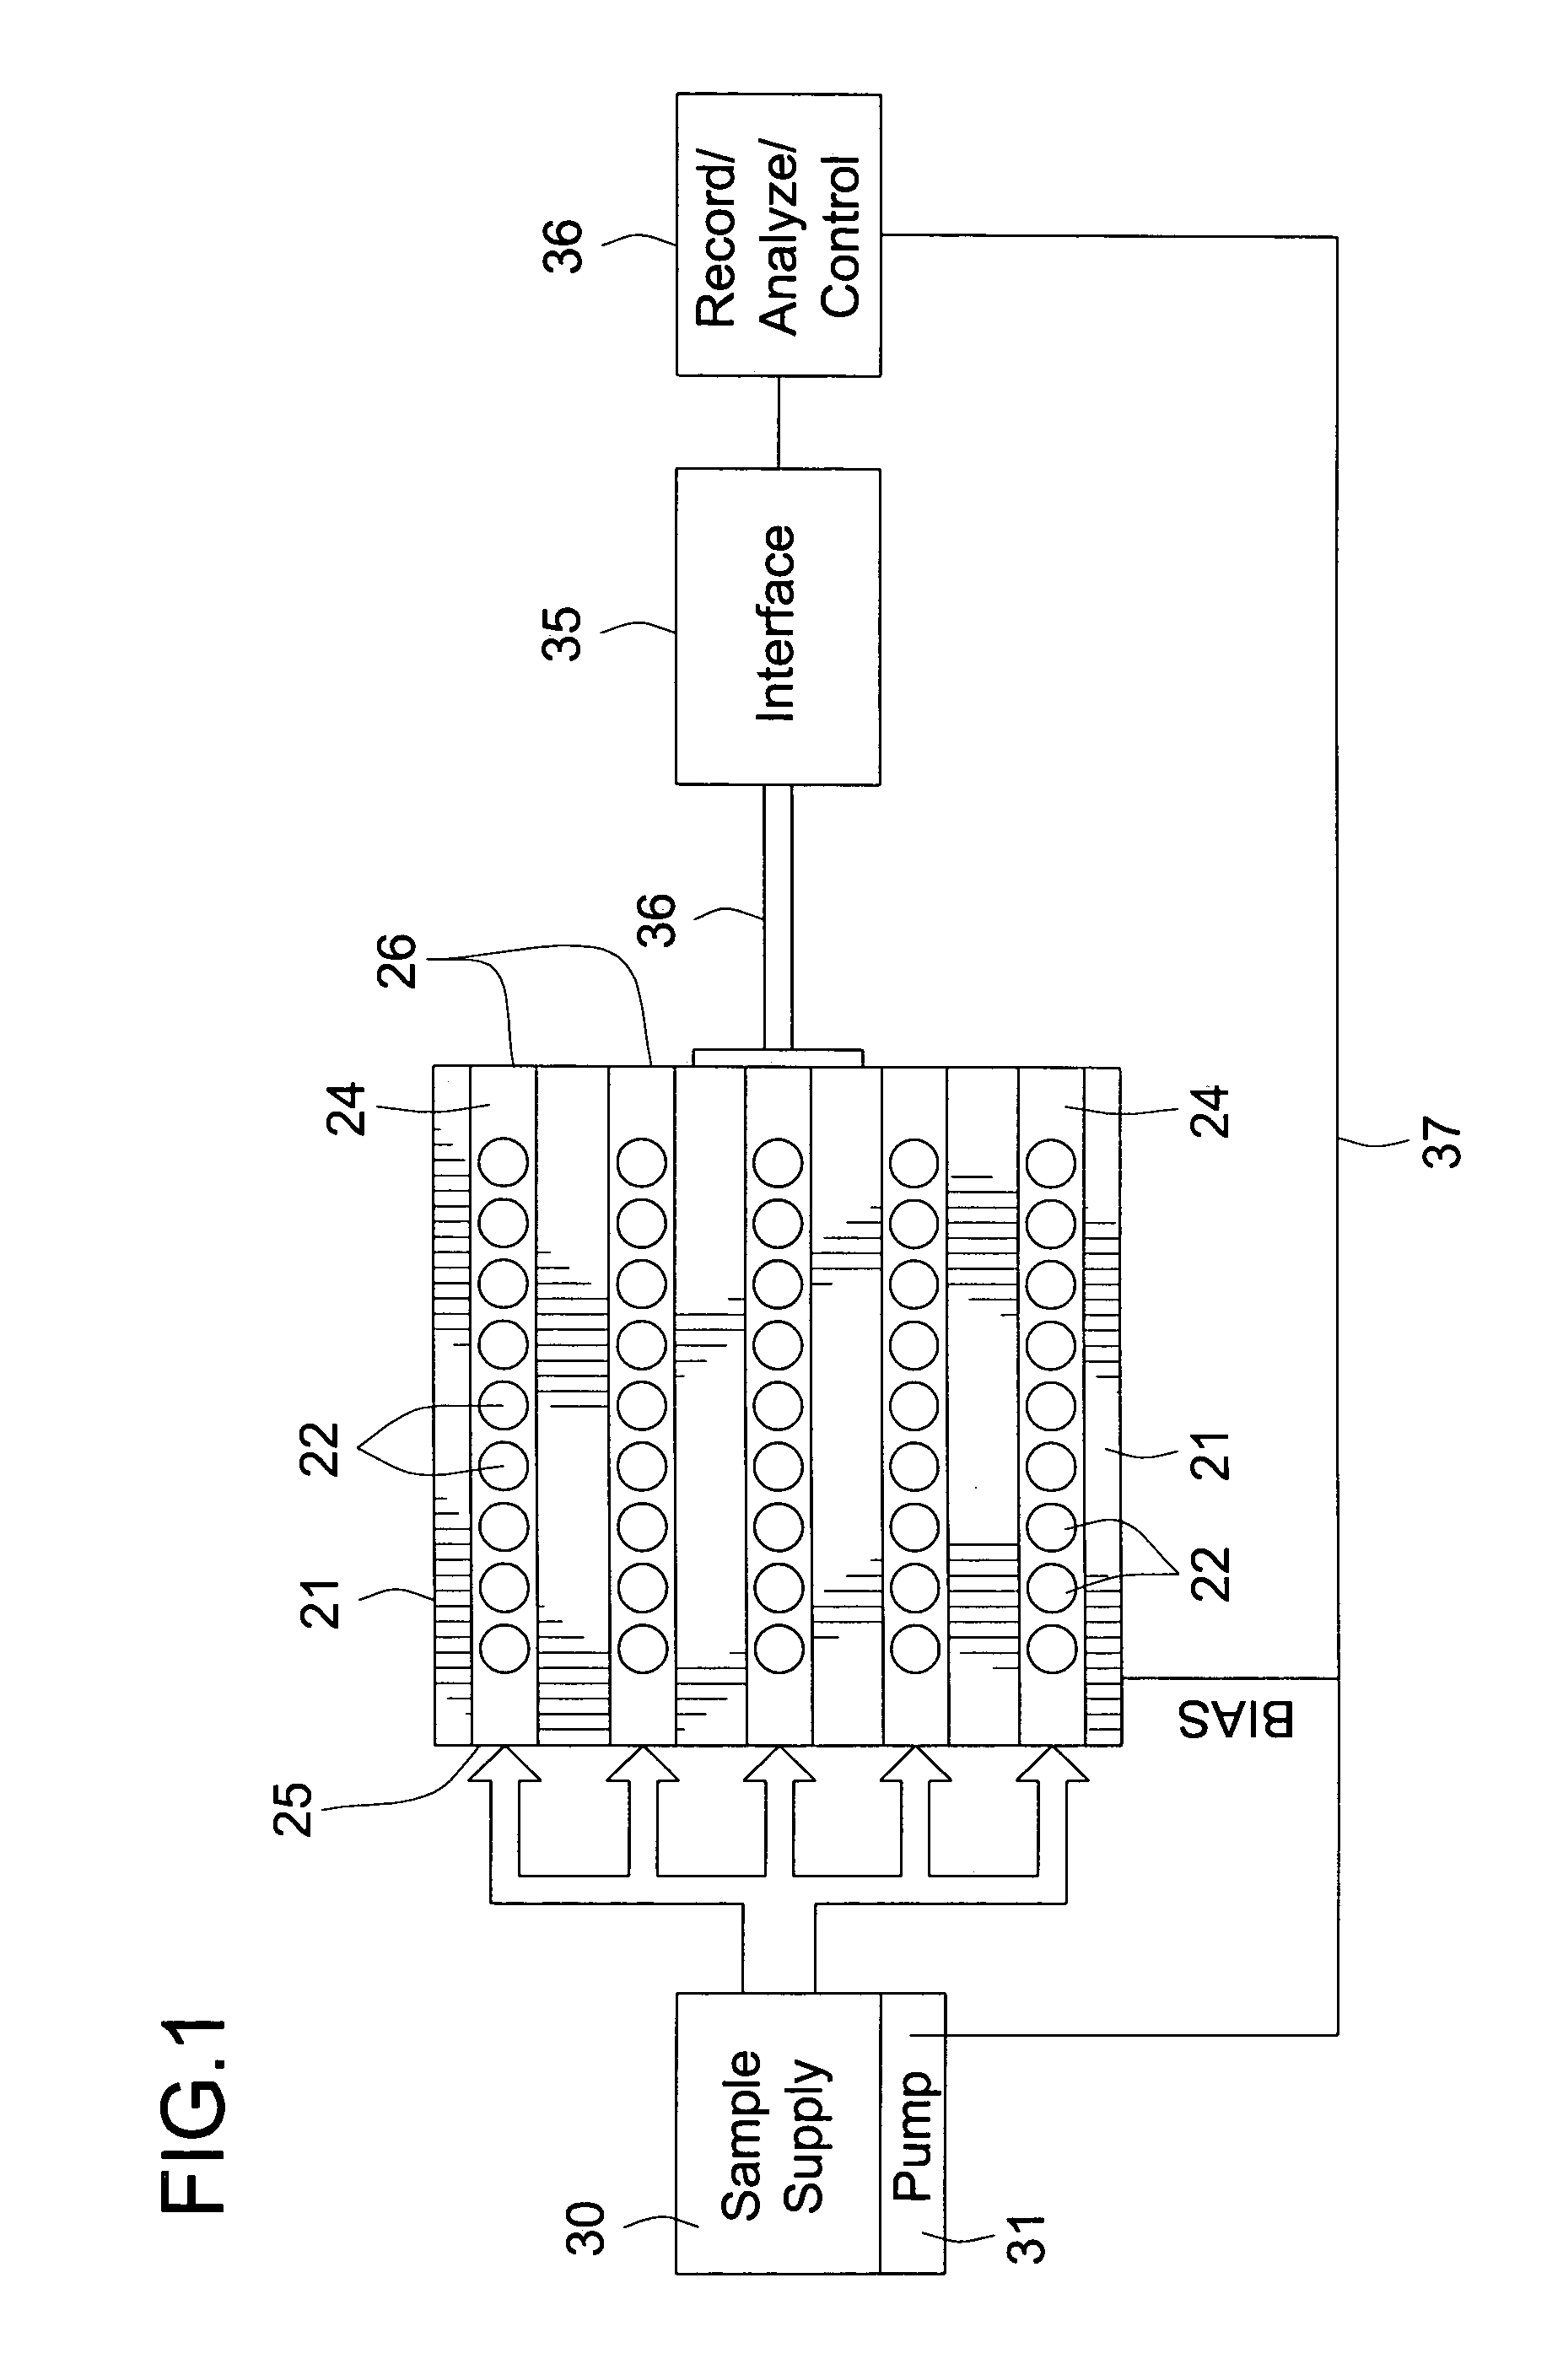 Method and apparatus for magnetoresistive monitoring of analytes in flow streams